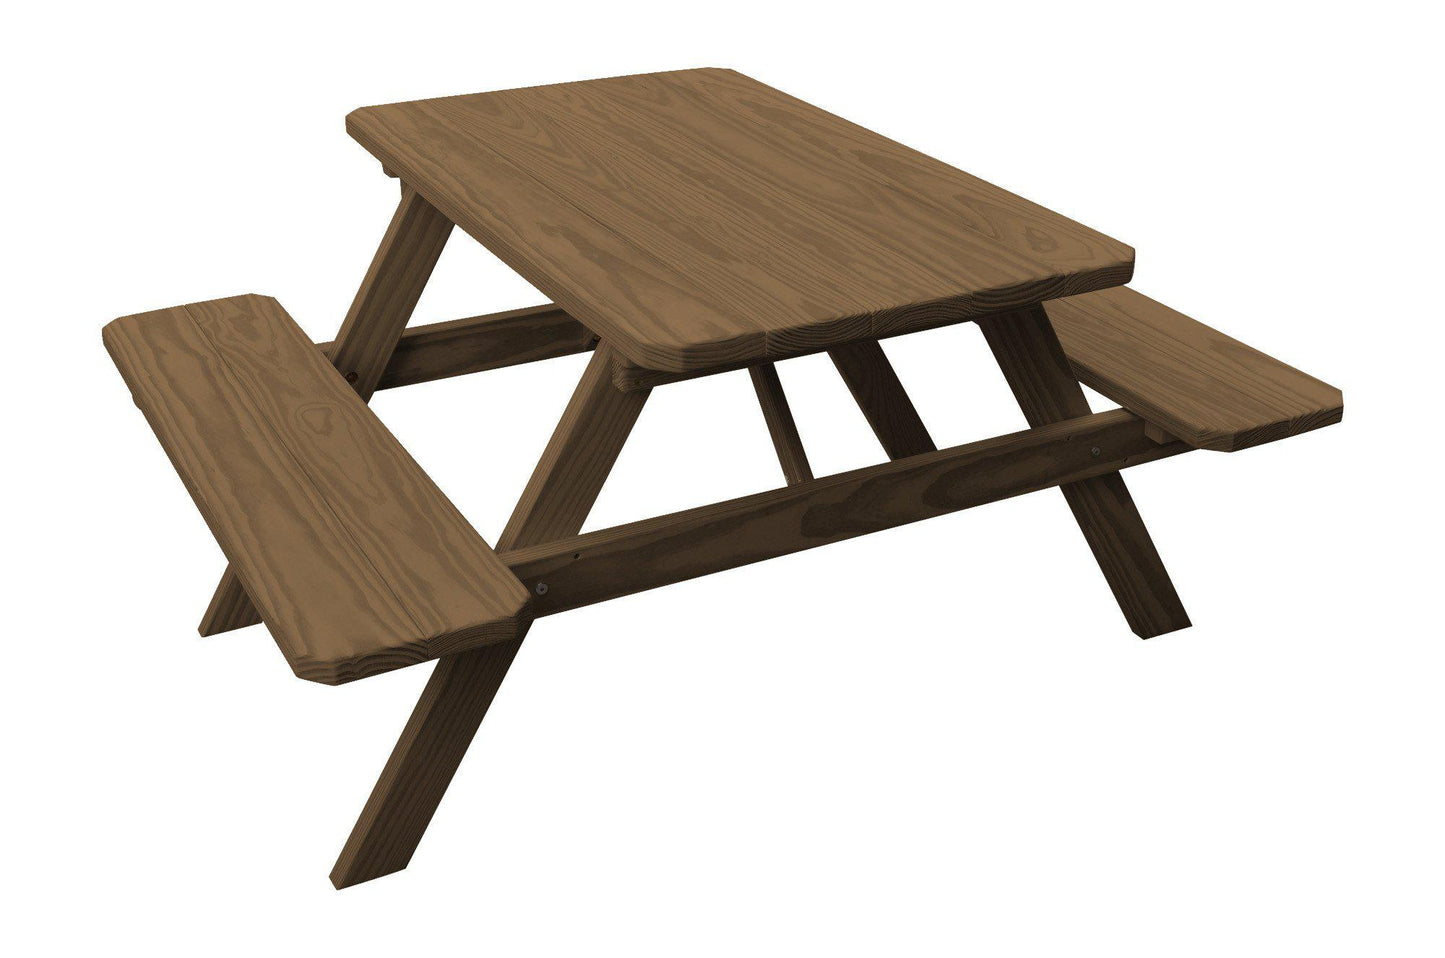 A&L Furniture Co. Pressure Treated Pine 4' Picnic Table w/ Attached Benches  - LEAD TIME TO SHIP 10 BUSINESS DAYS